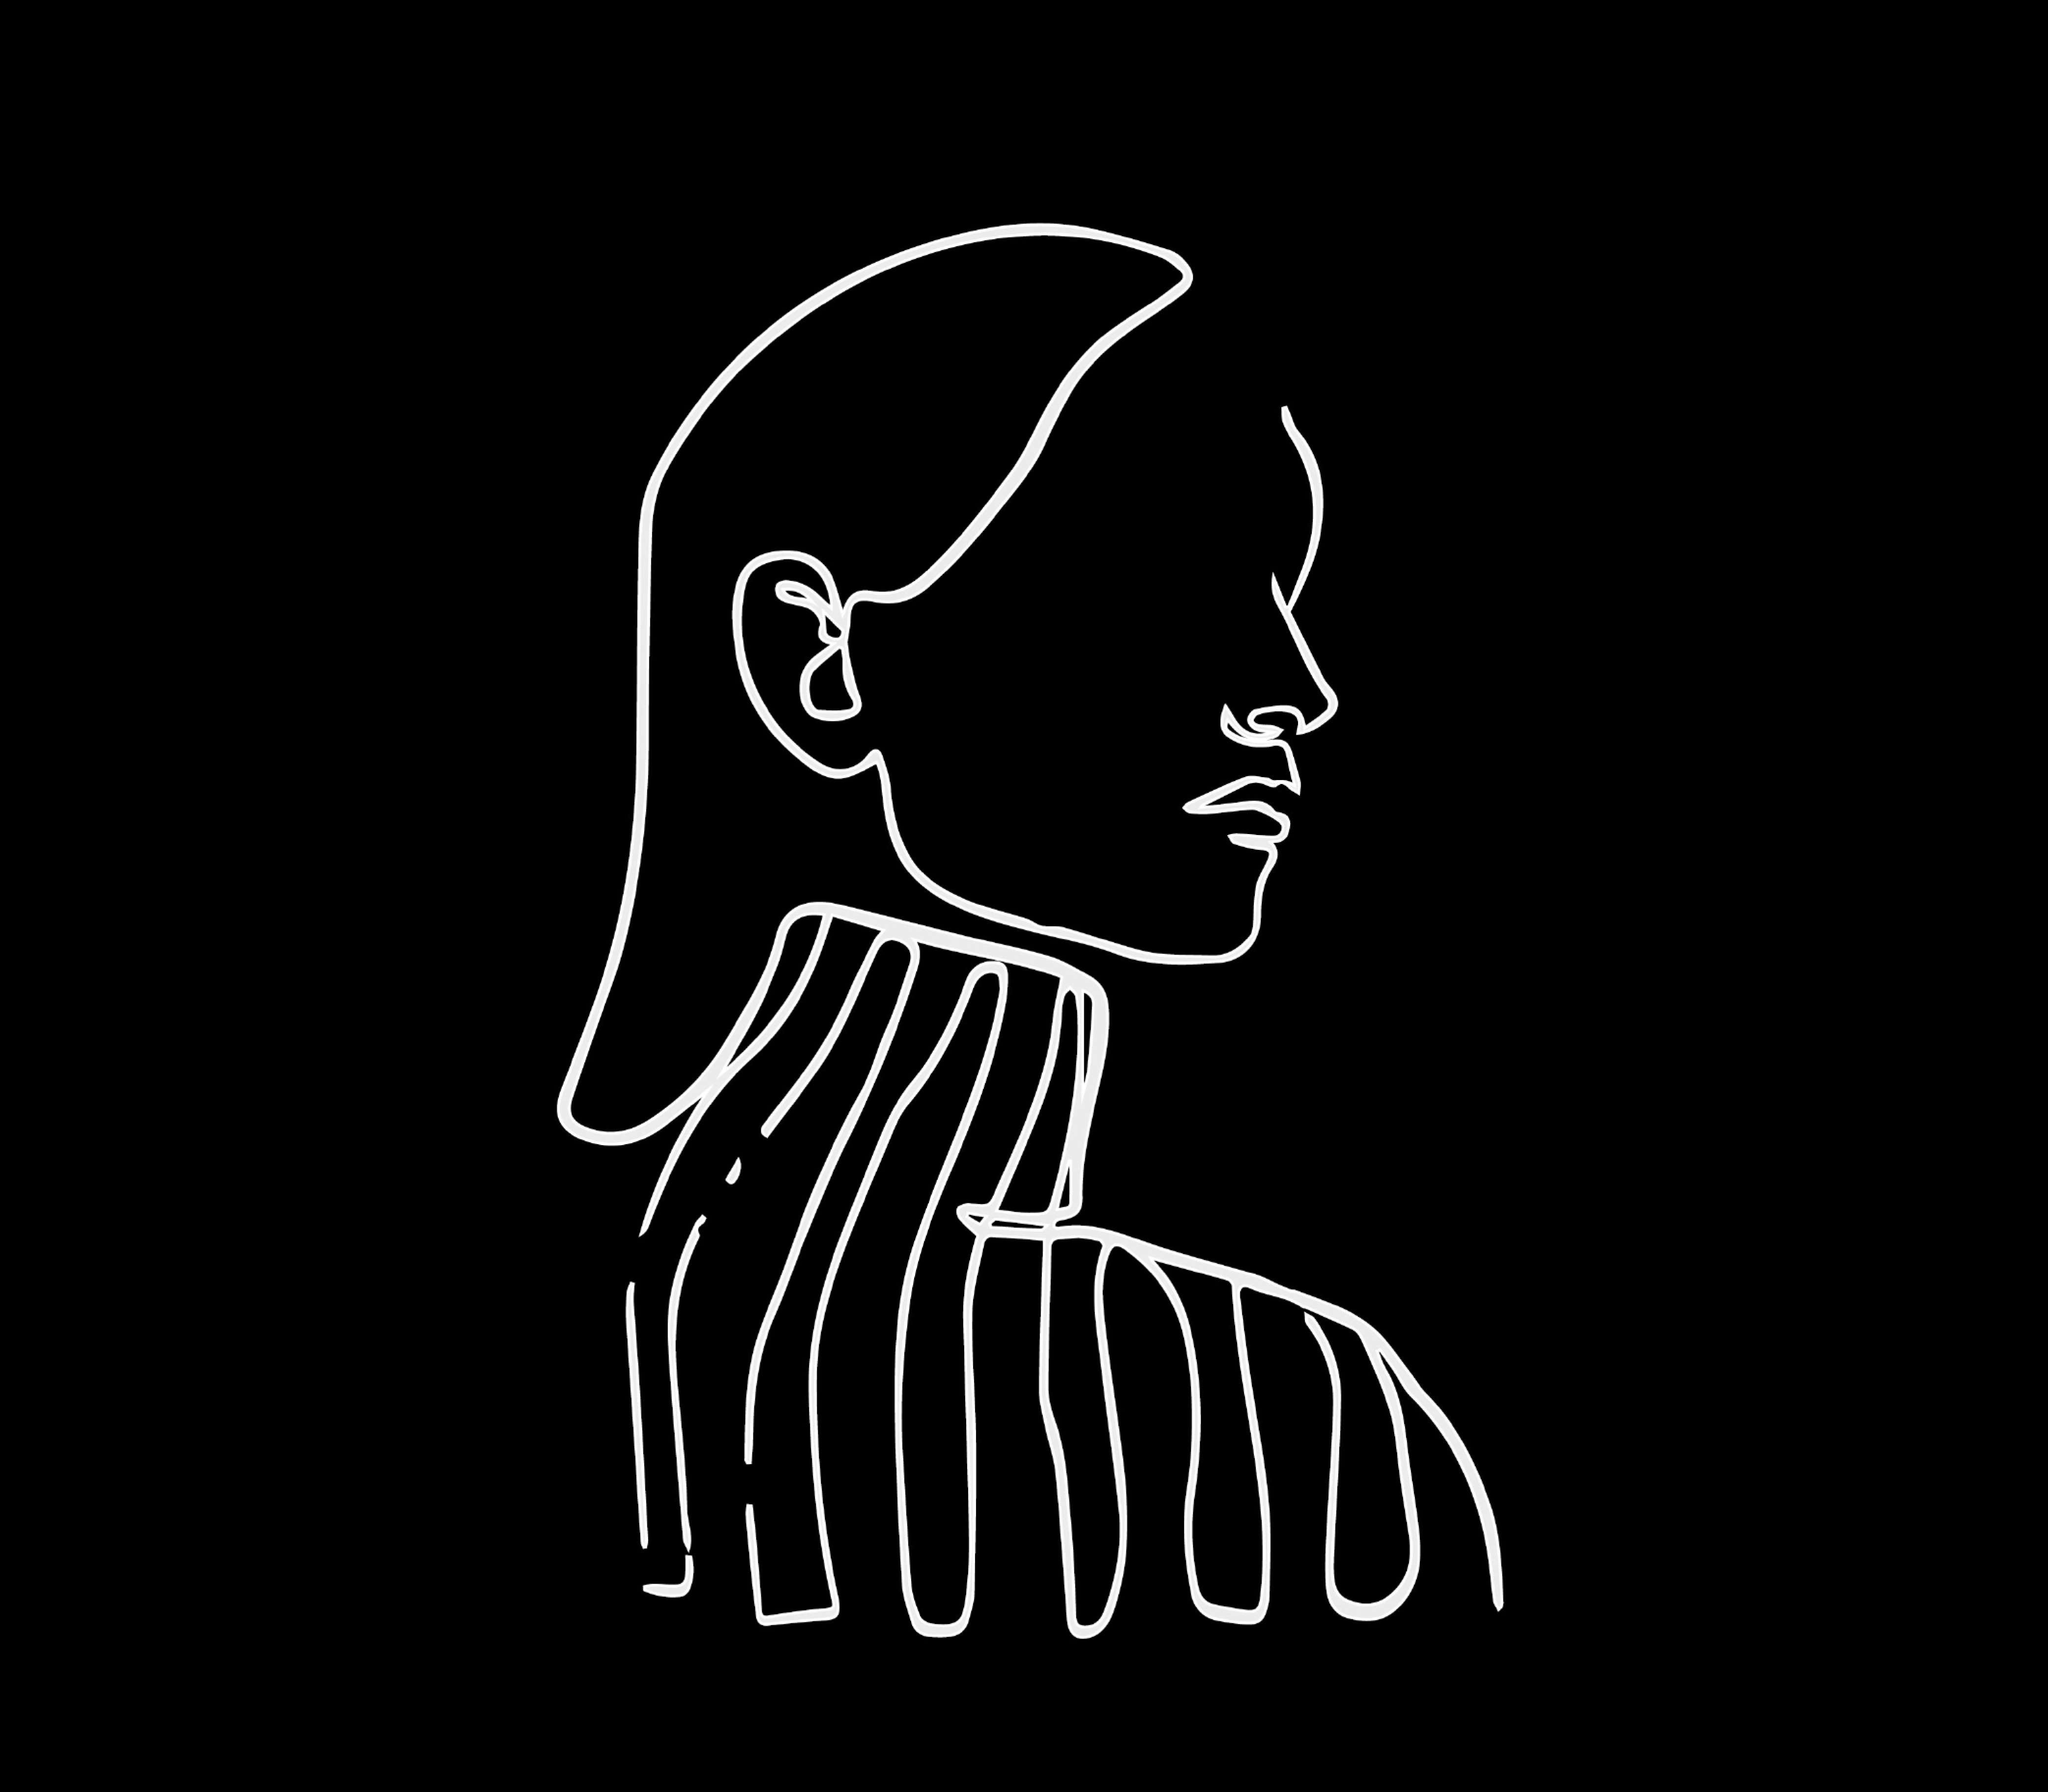 A black image with a white outline of a female figure.